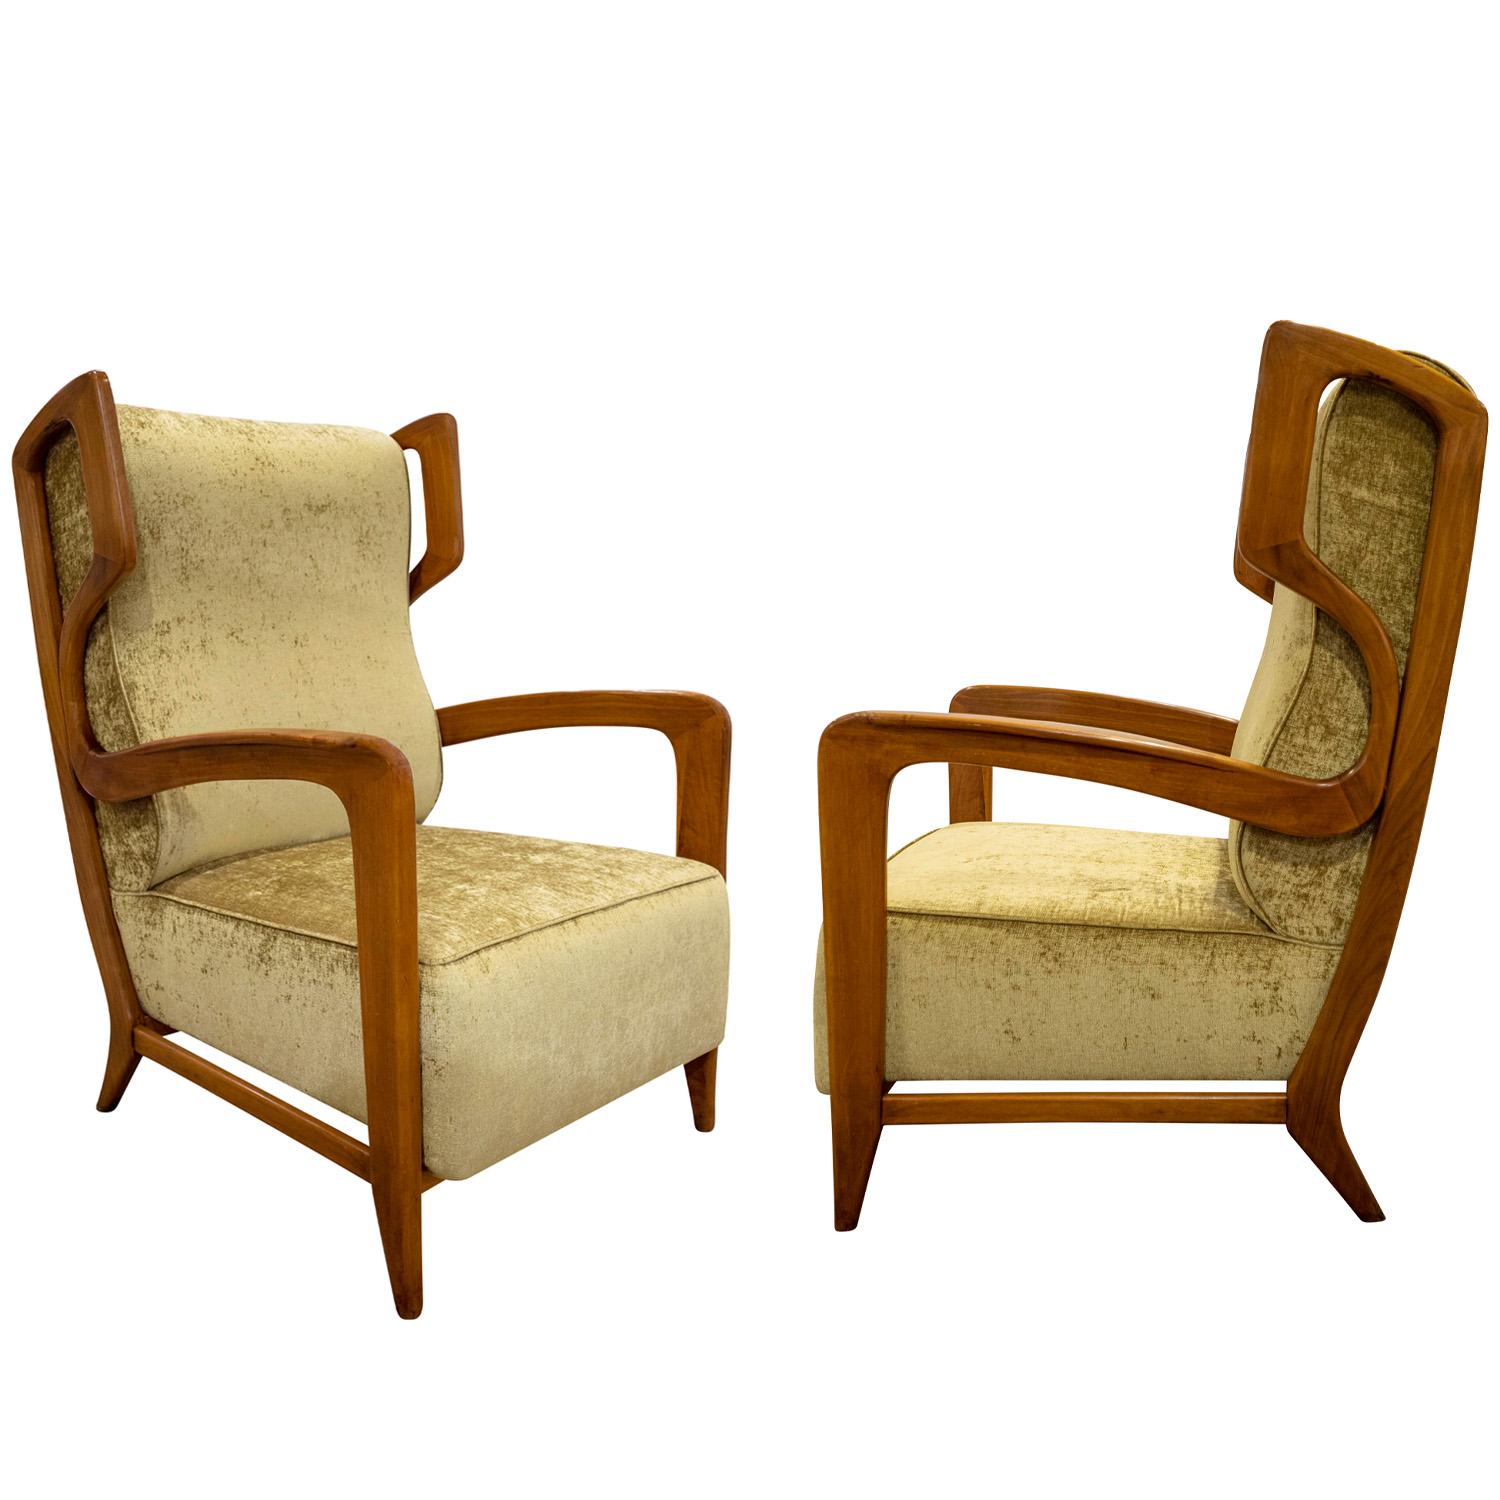 Rare and important pair of high back lounge chairs with wood frames and upholstered seats and backs by Gio Ponti and fabricated by Ariberto Colombo, Cantu, Italy 1940's. These chairs are beautifully made with exceptional attention paid to every